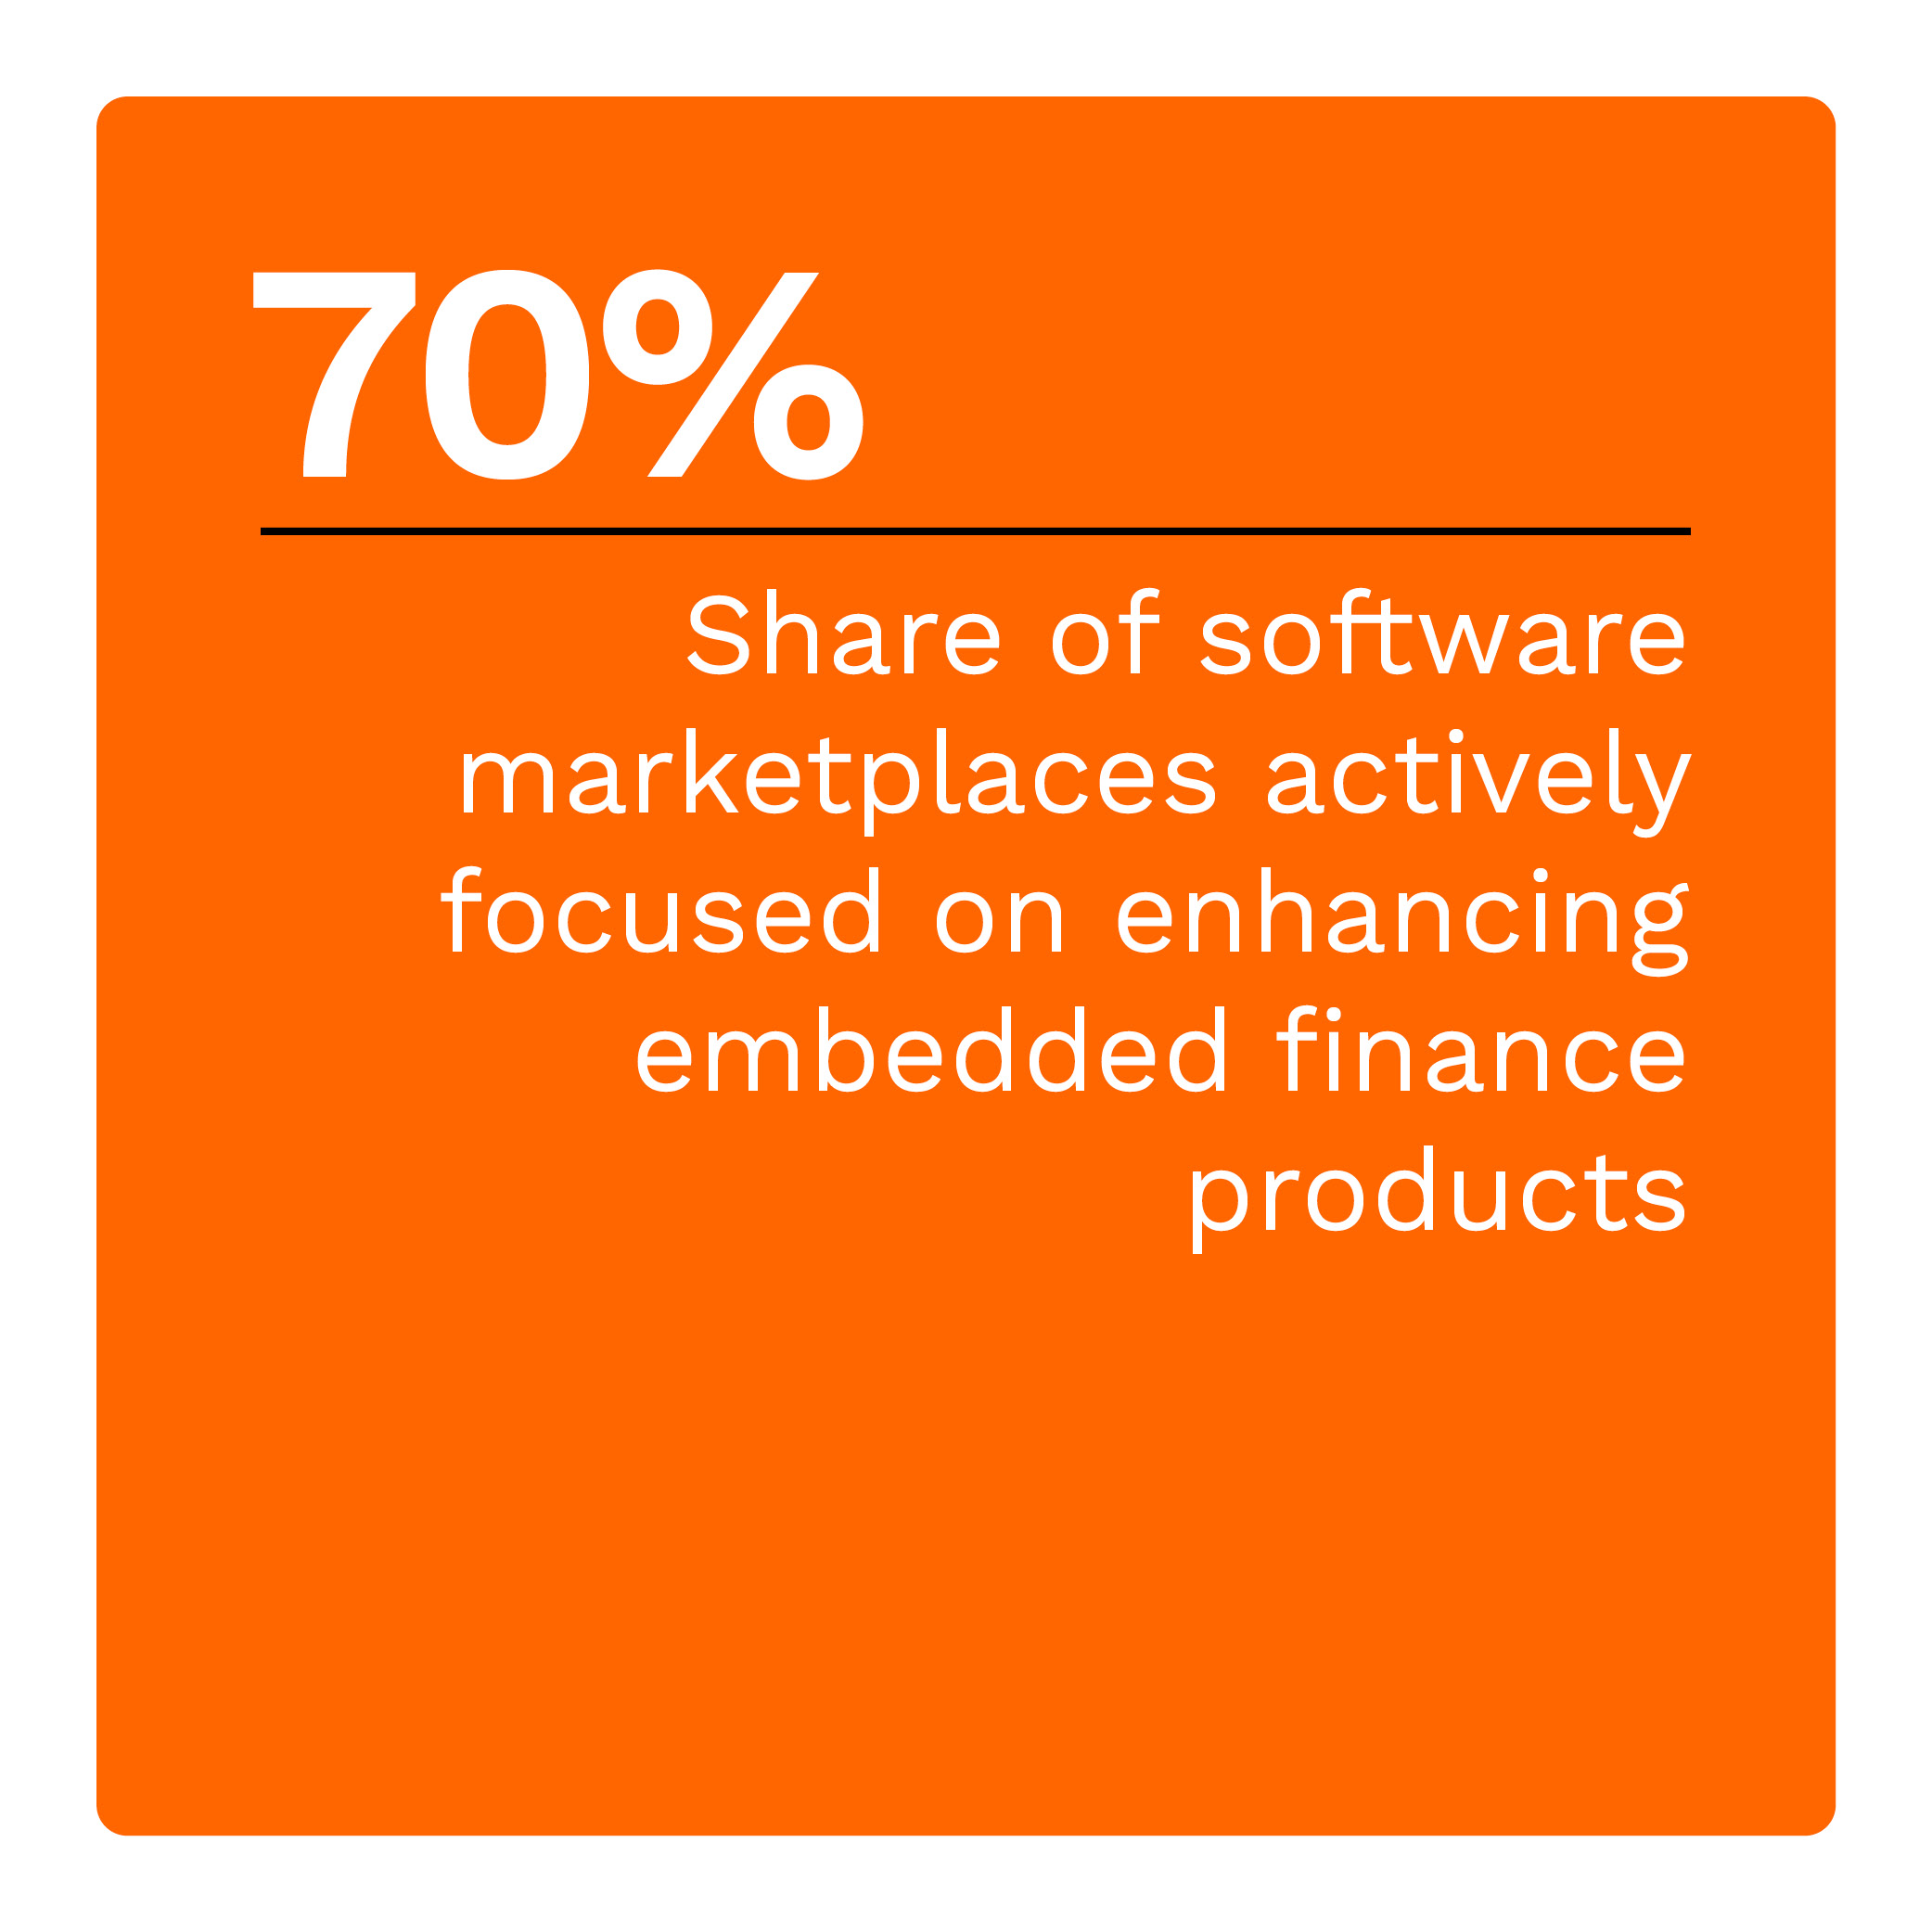 70%: Share of software marketplaces actively focused on enhancing embedded finance products